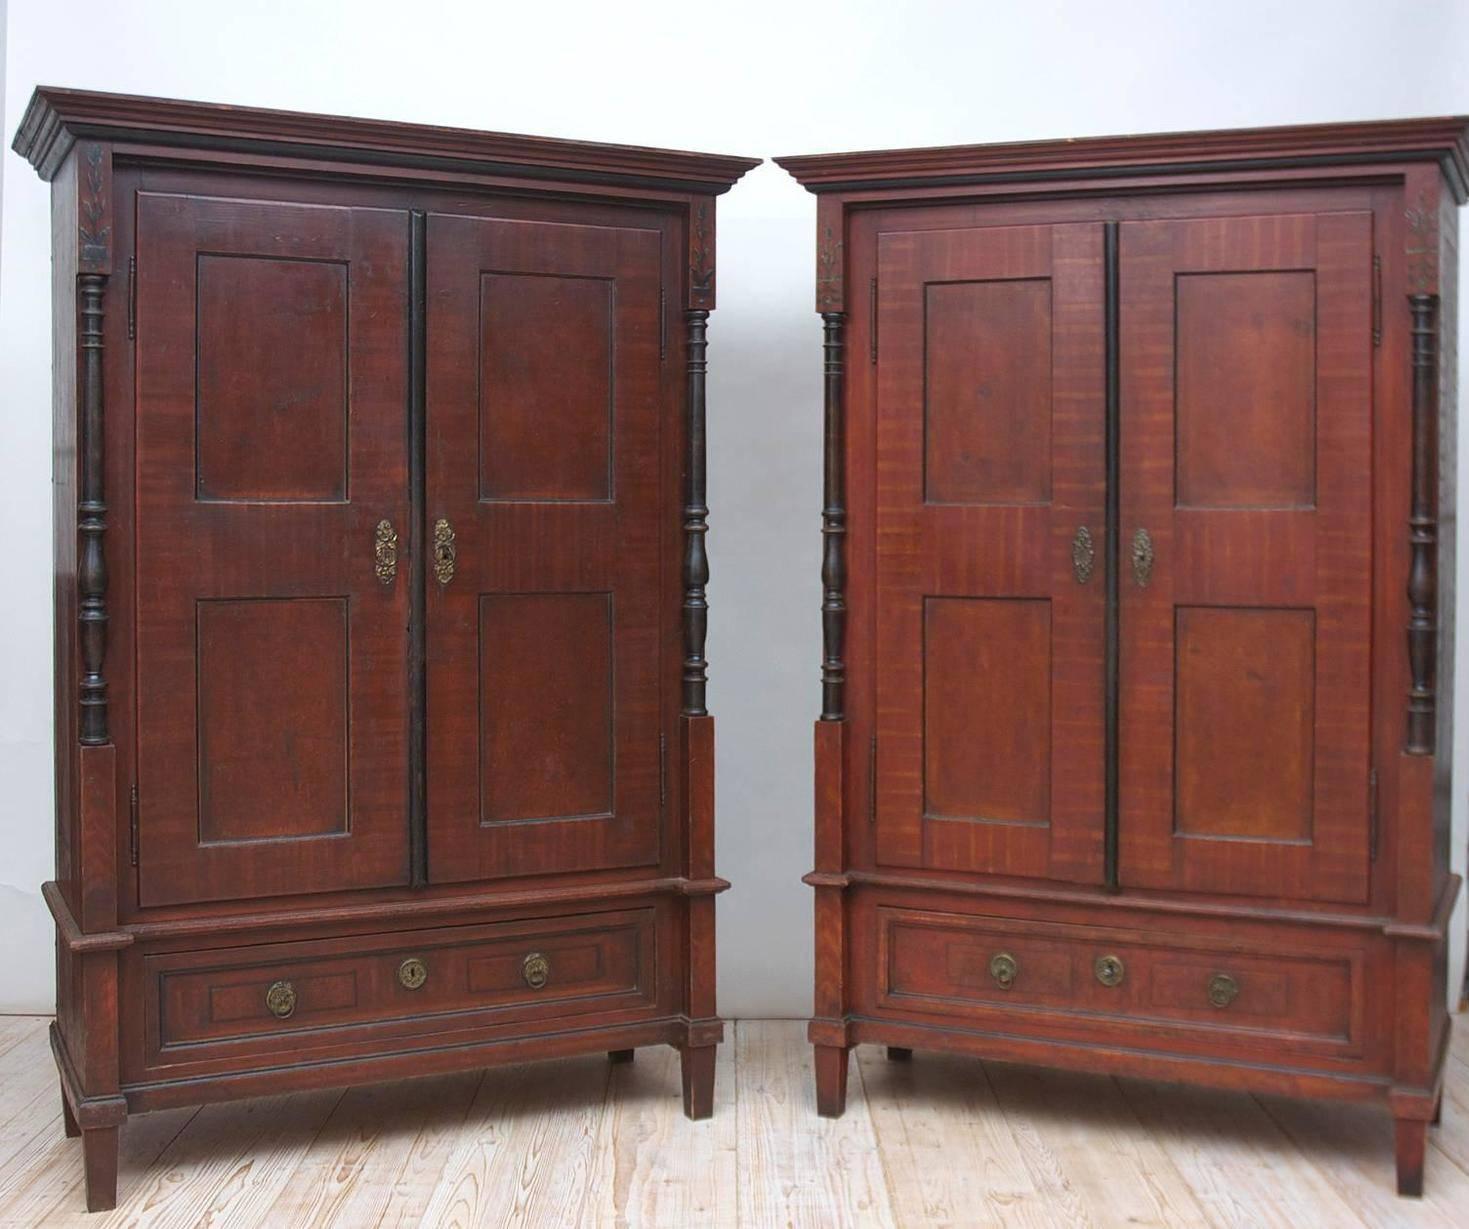 From the Austro-Hungarian Empire, a nearly identical pair of armoires with ebonized columns and astragal, and the original tooled and grained finish. Offers divided storage with adjustable shelving, primitive hanging rod in one and a small original